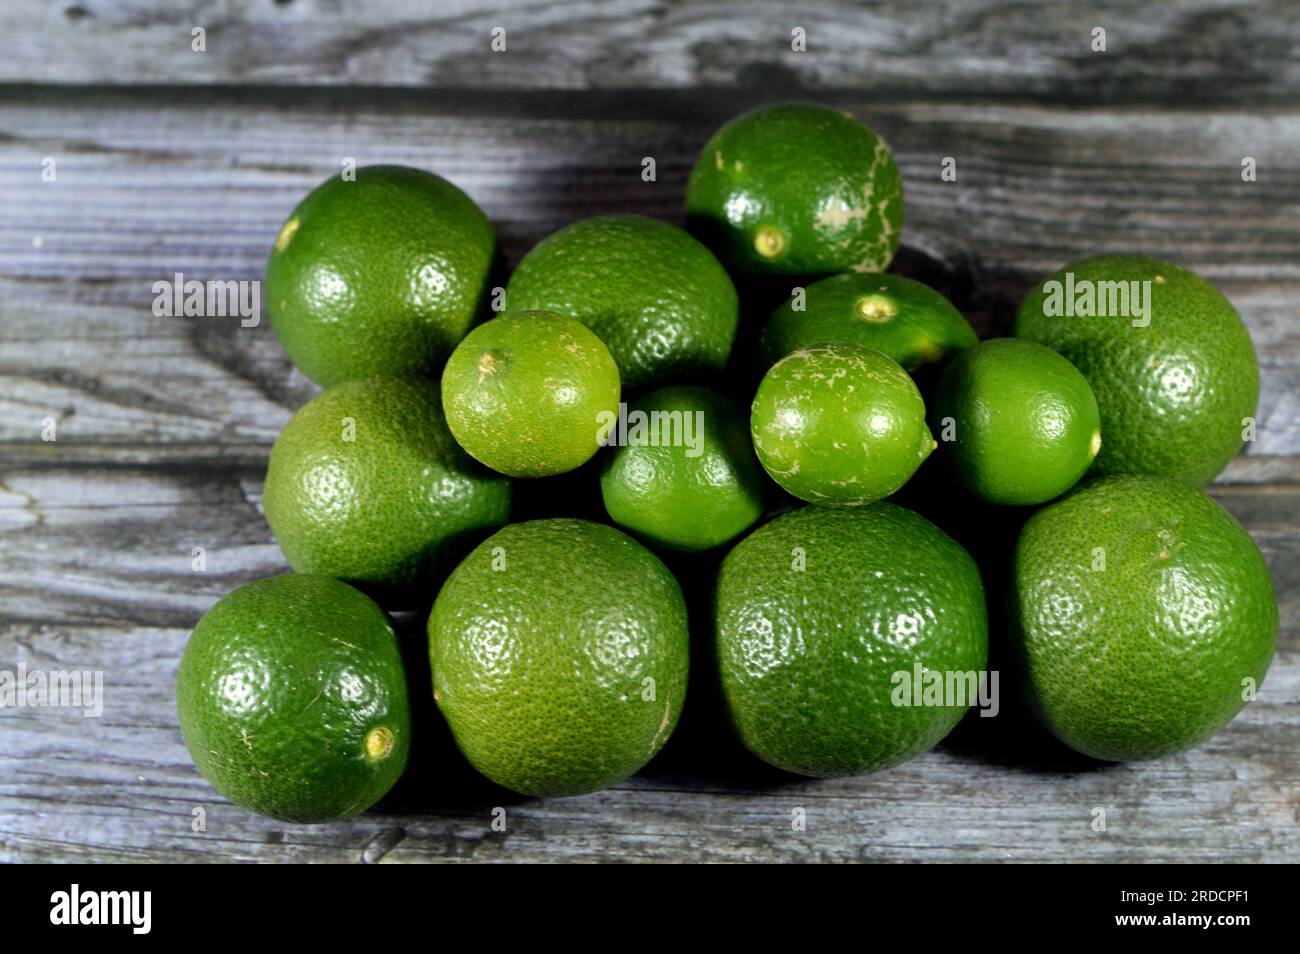 Pile of fresh green lemons, The lemon (Citrus limon) is a species of small evergreen trees in the flowering plant family Rutaceae, native to Asia, use Stock Photo